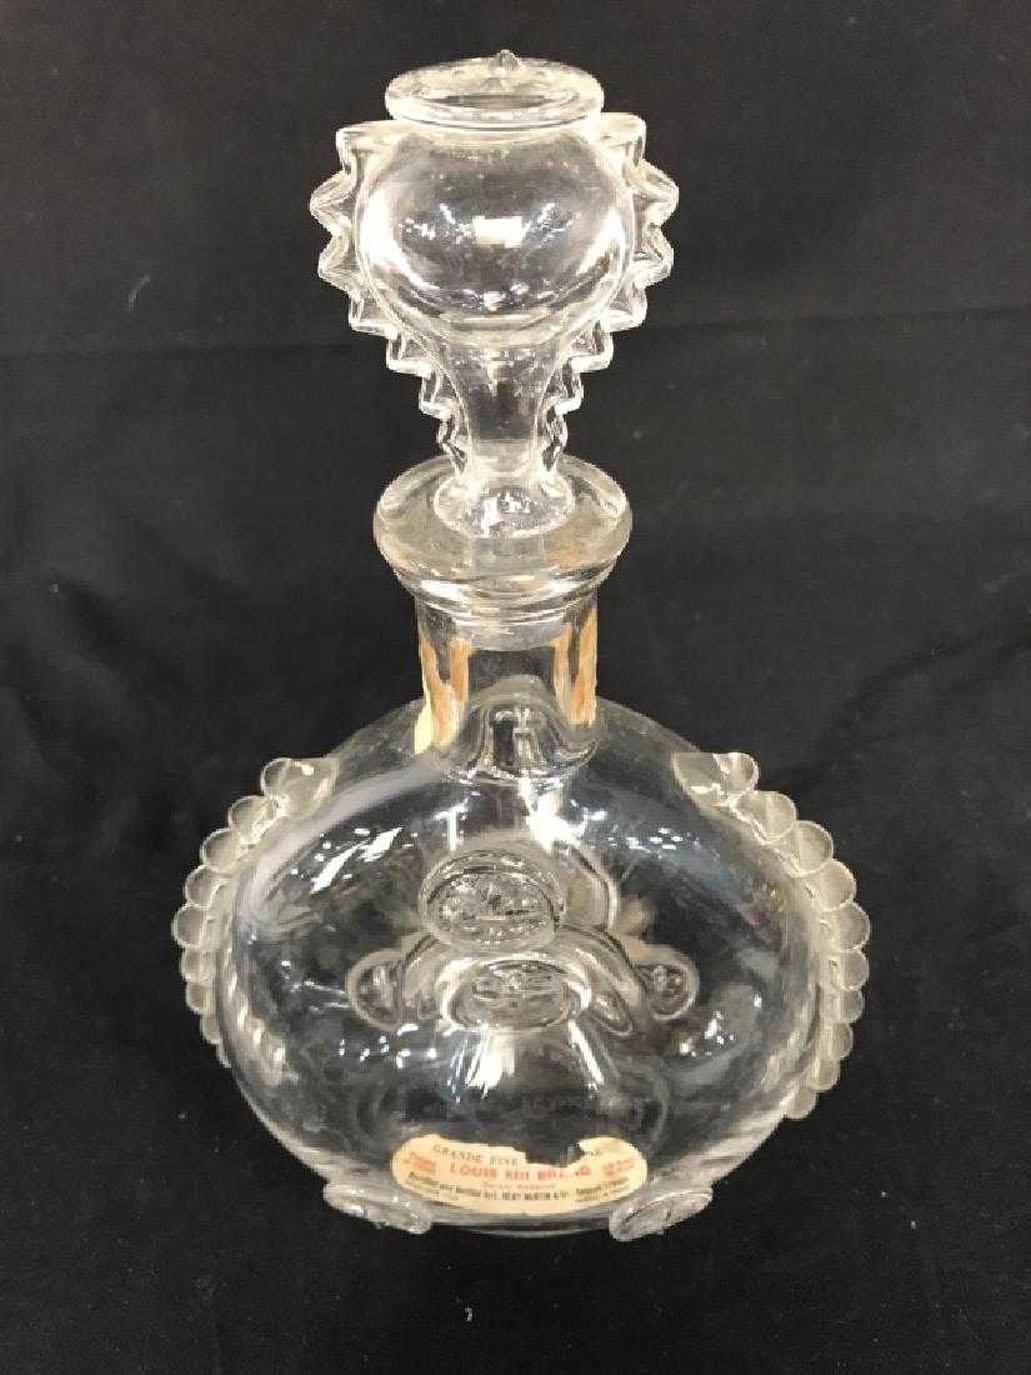 Baccarat Remy Martin Louis XIII Decanter 1